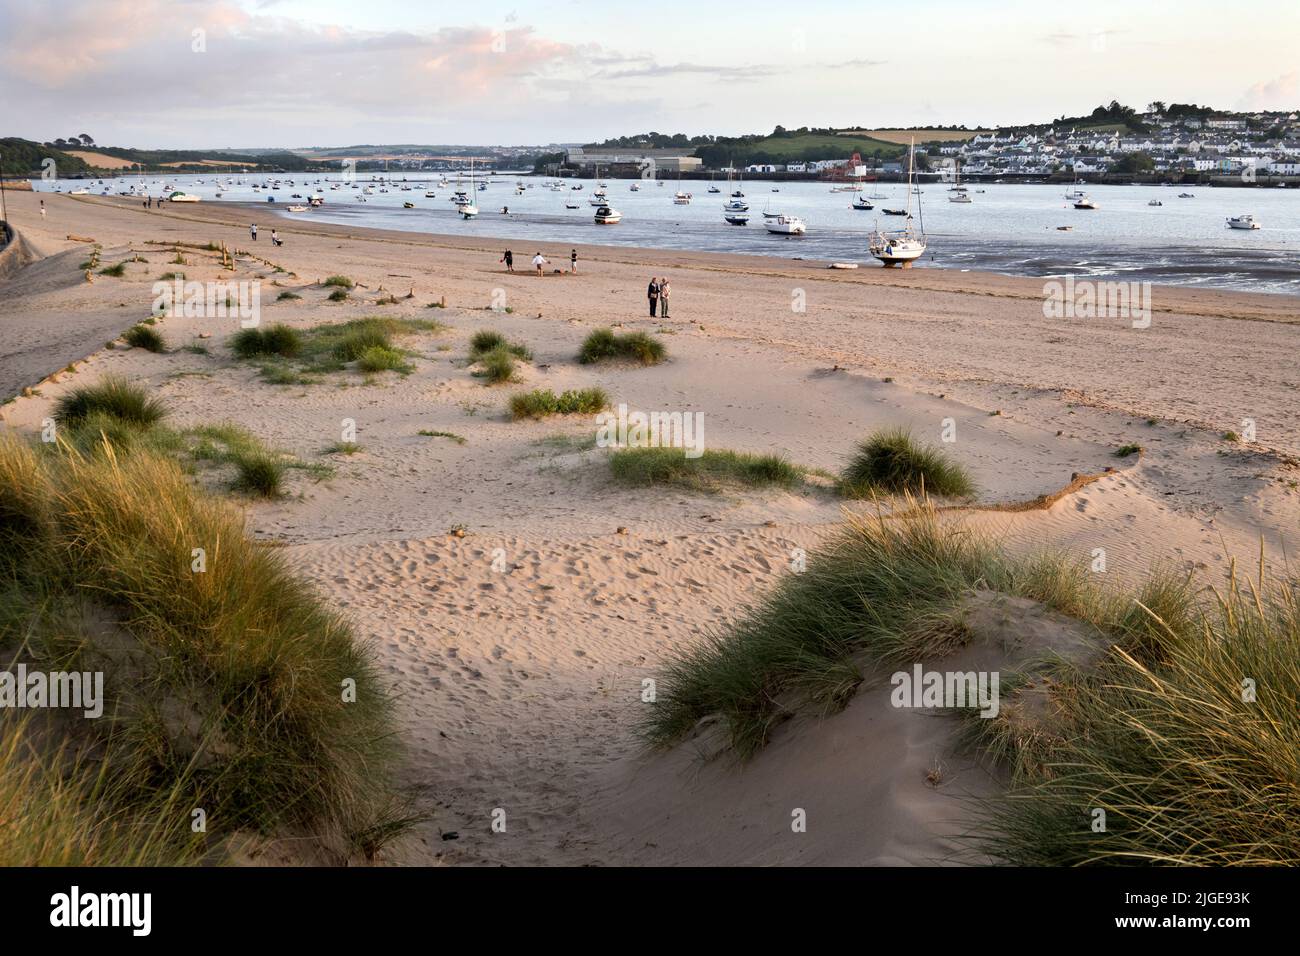 Evening on the the beach at Instow, looking across the bay to Appledore, Devon, UK Stock Photo